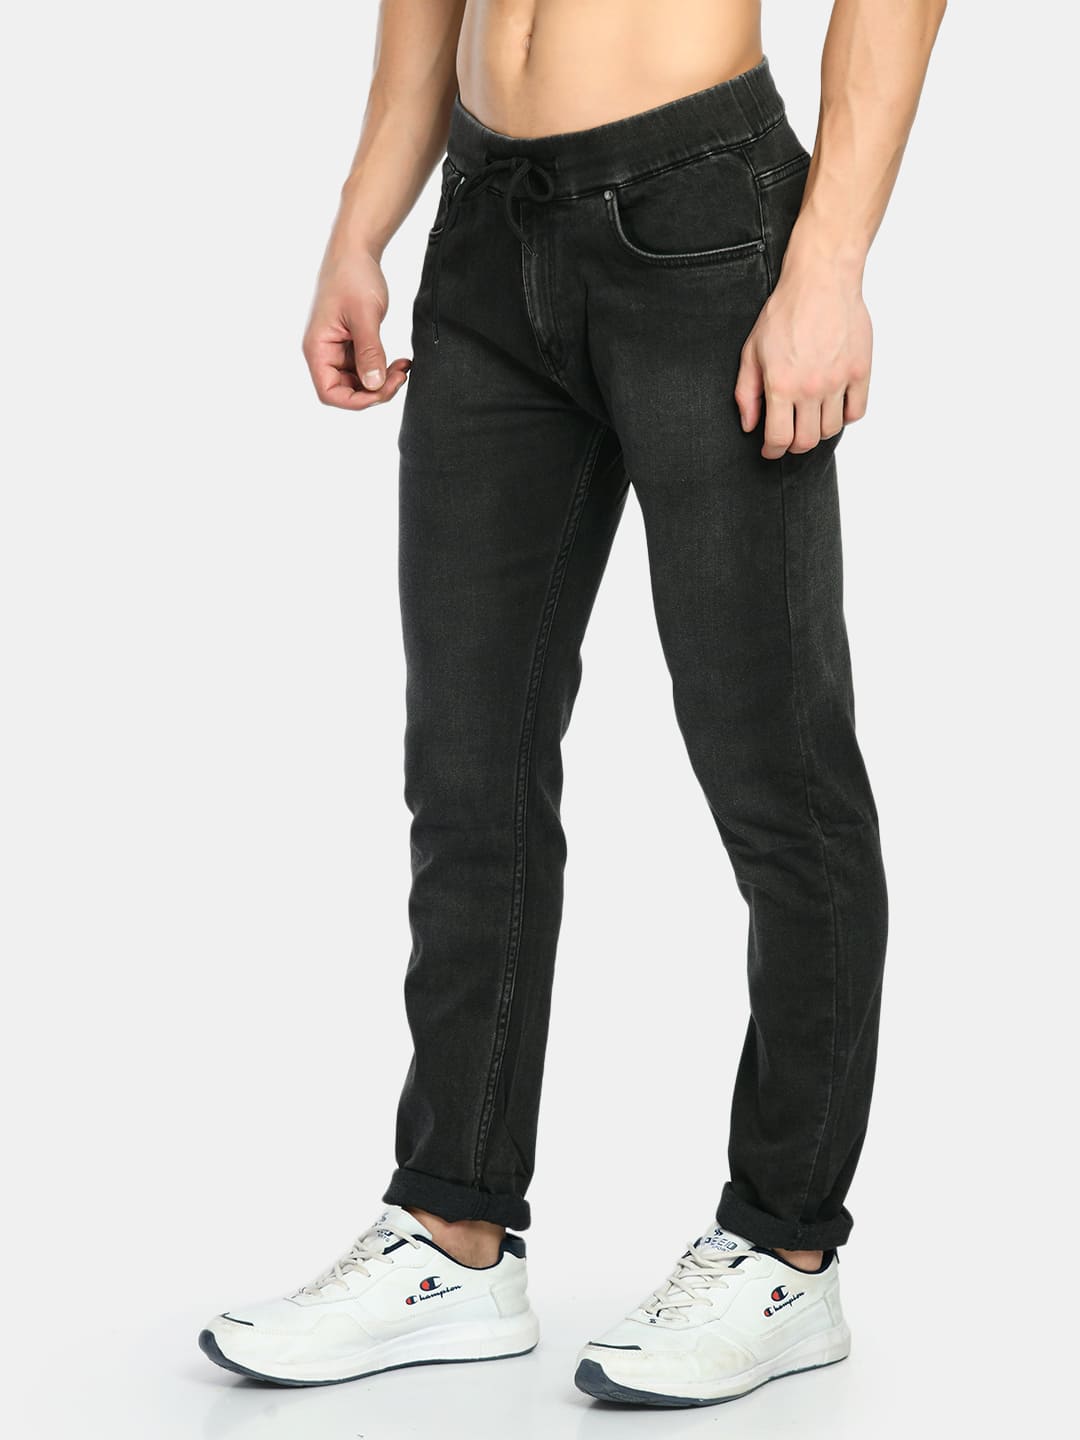 Men's Black Straight Fit Casual Jogger - SQUIREHOOD